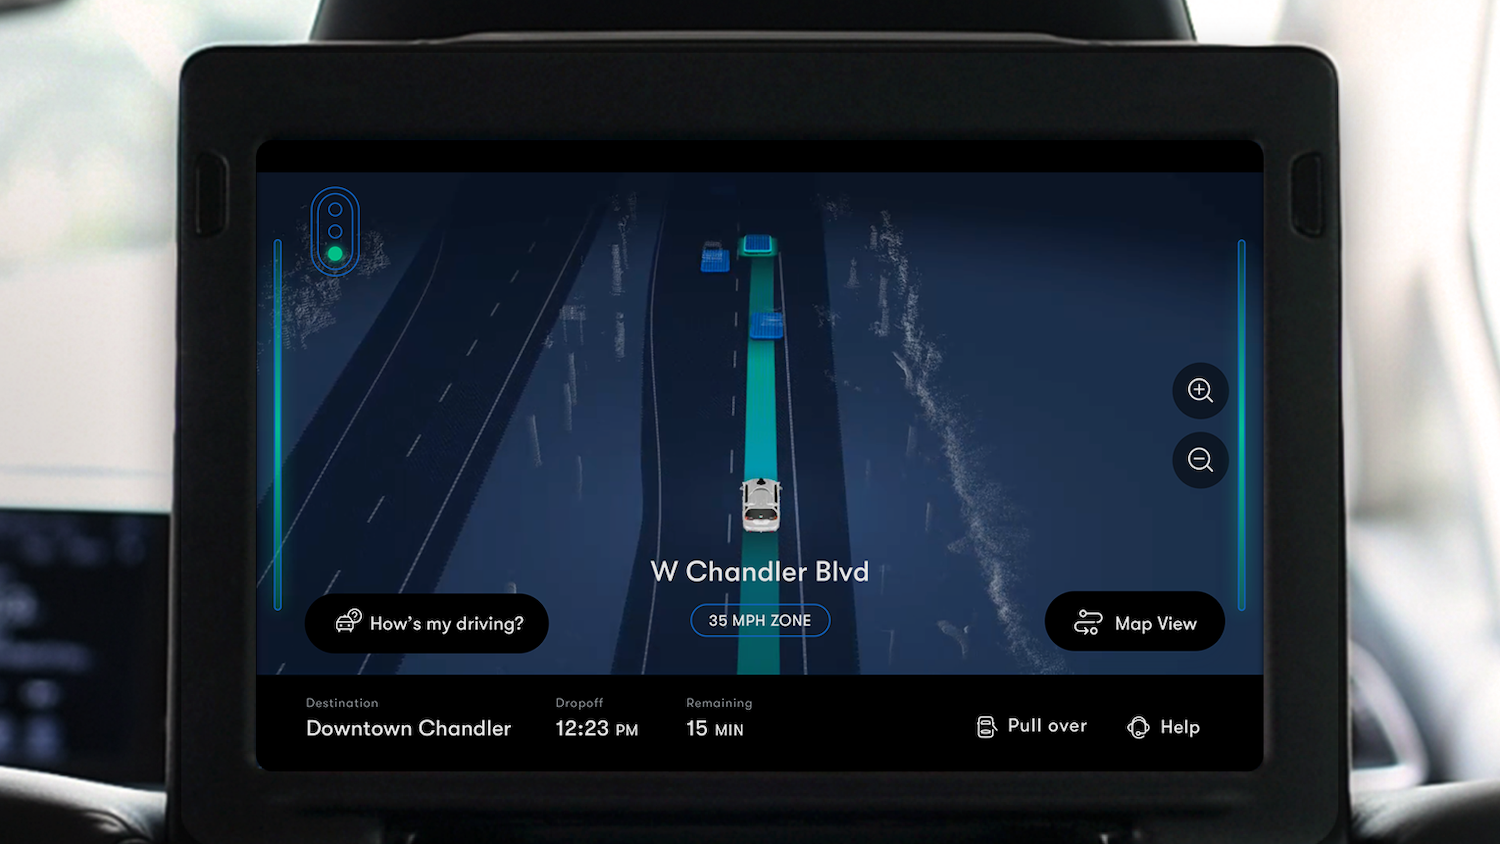 The passenger interface presents a map view of what the car sees.